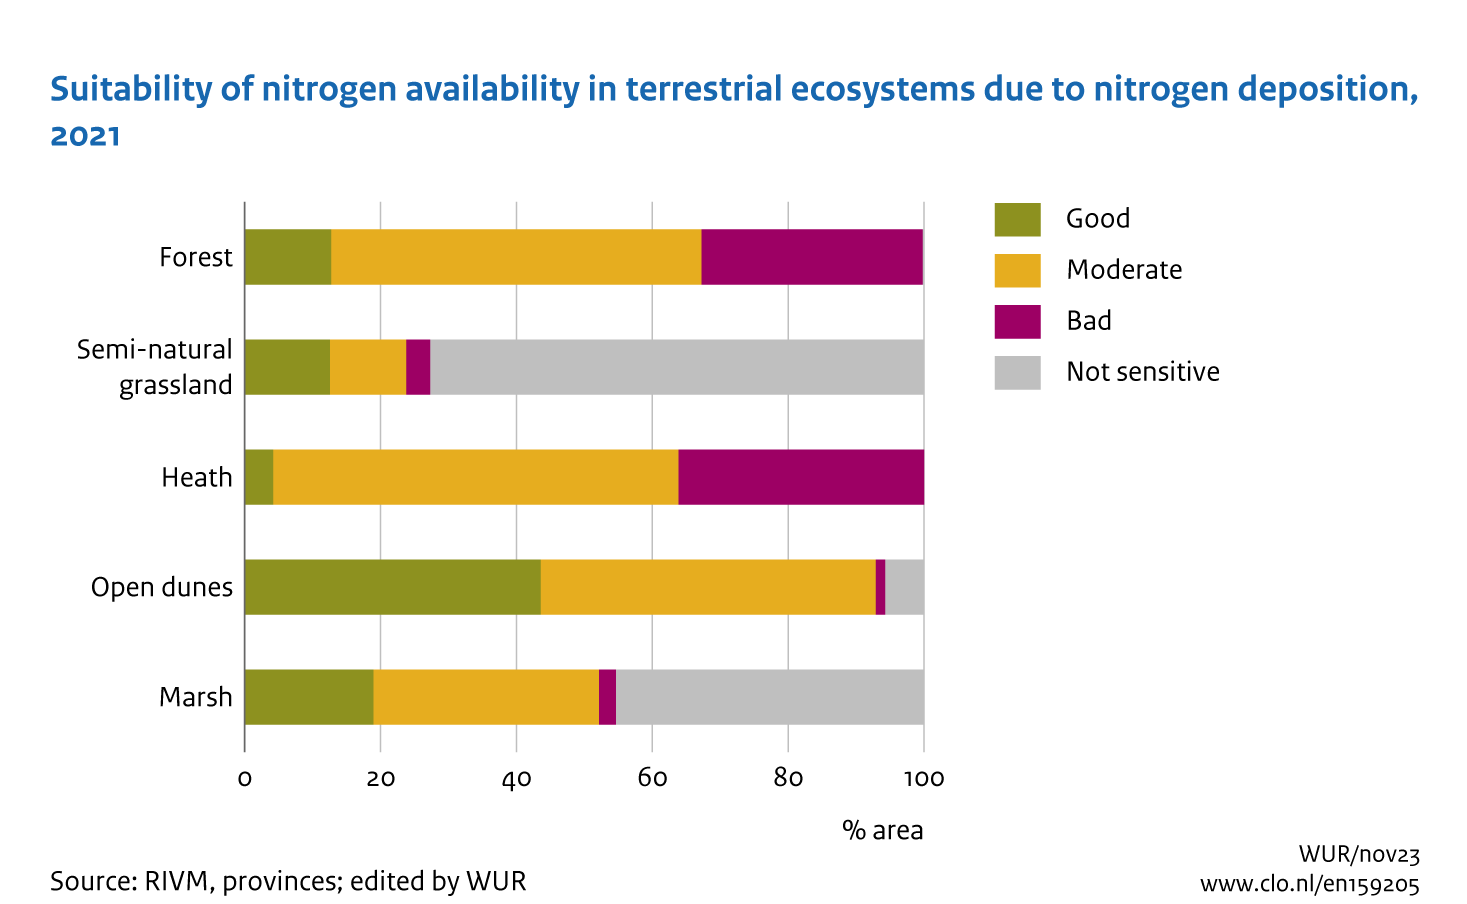 Image Suitability of nitrogen availability in terrestrial ecosystems due to nitrogen deposition, 2021. The image is further explained in the text.